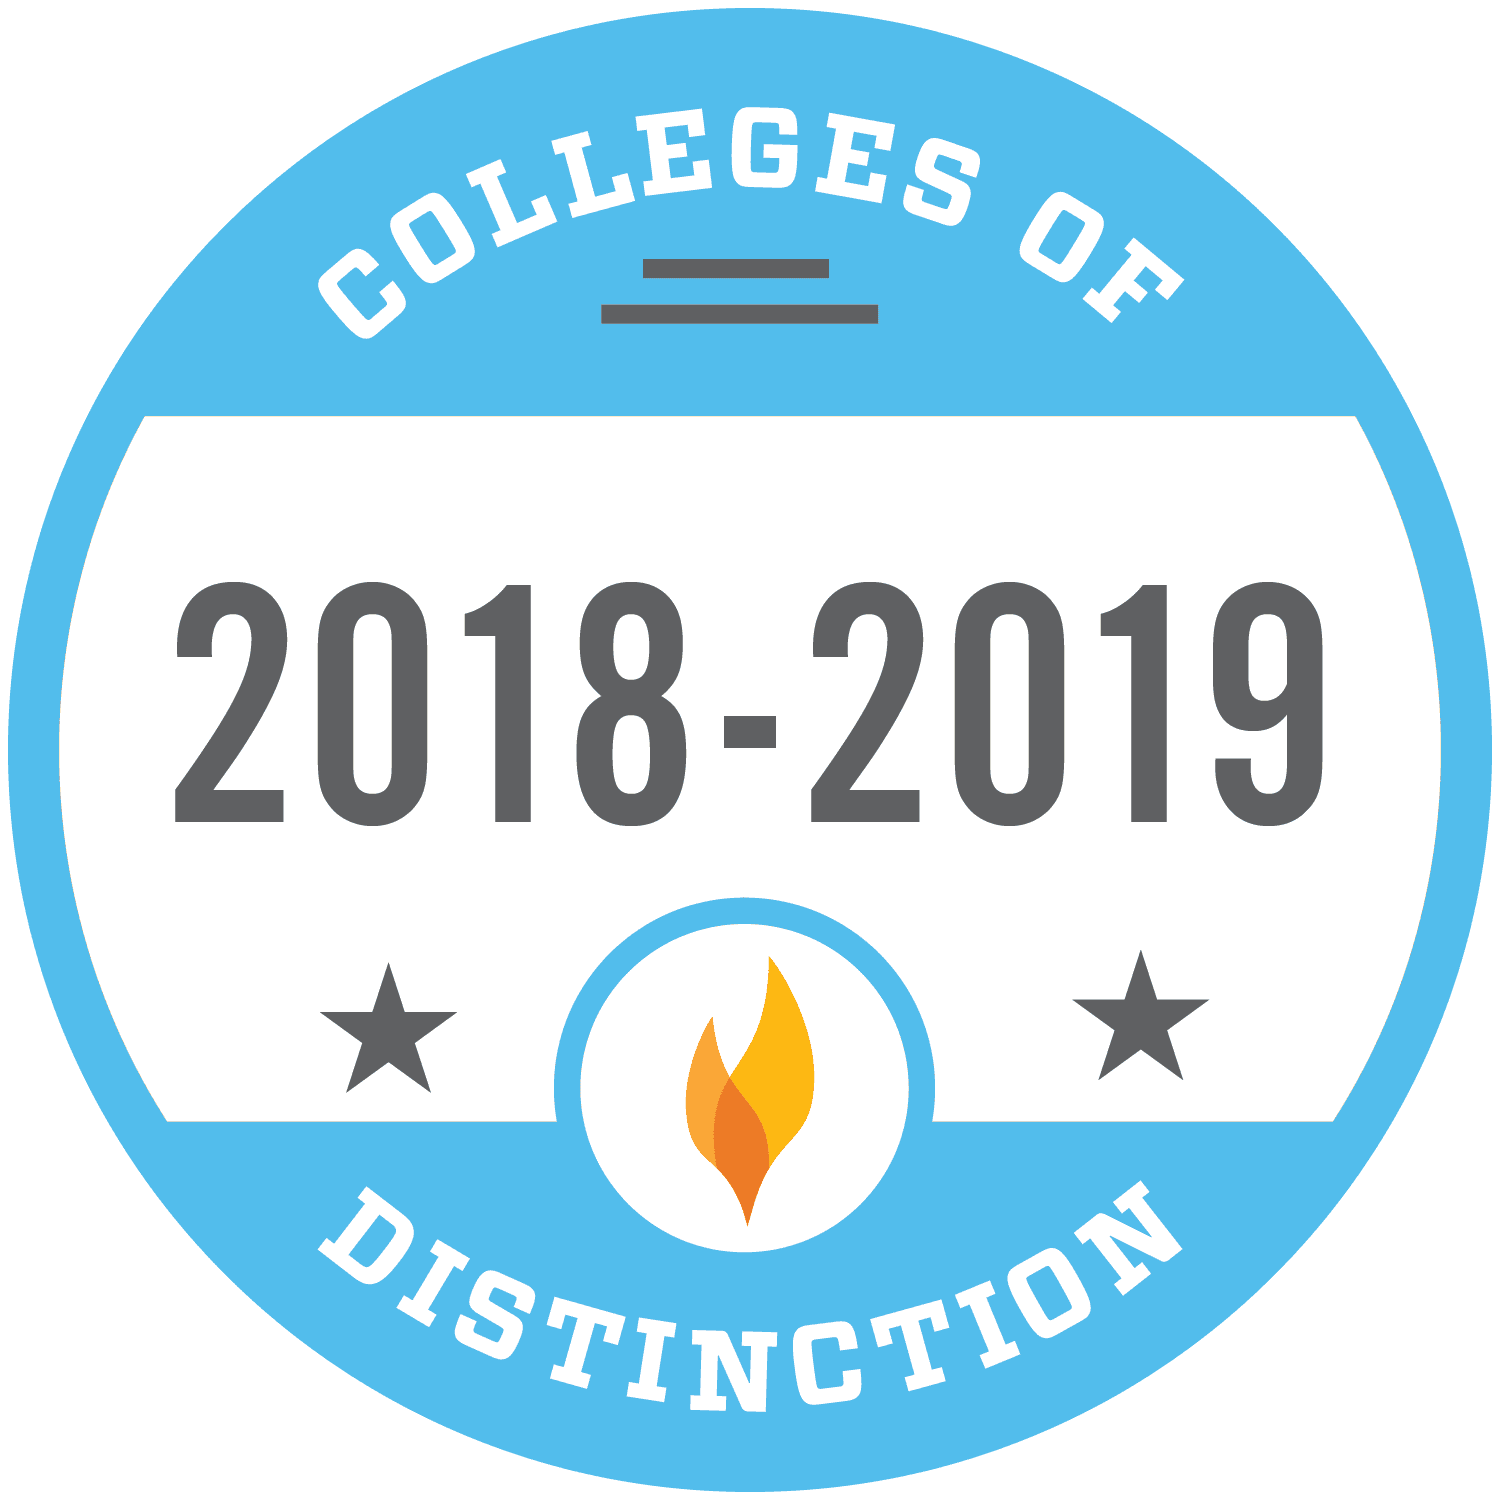 Blue Circle. States "Colleges of Distinction" at top and bottom. States "2018-2019" on white background in the middle.